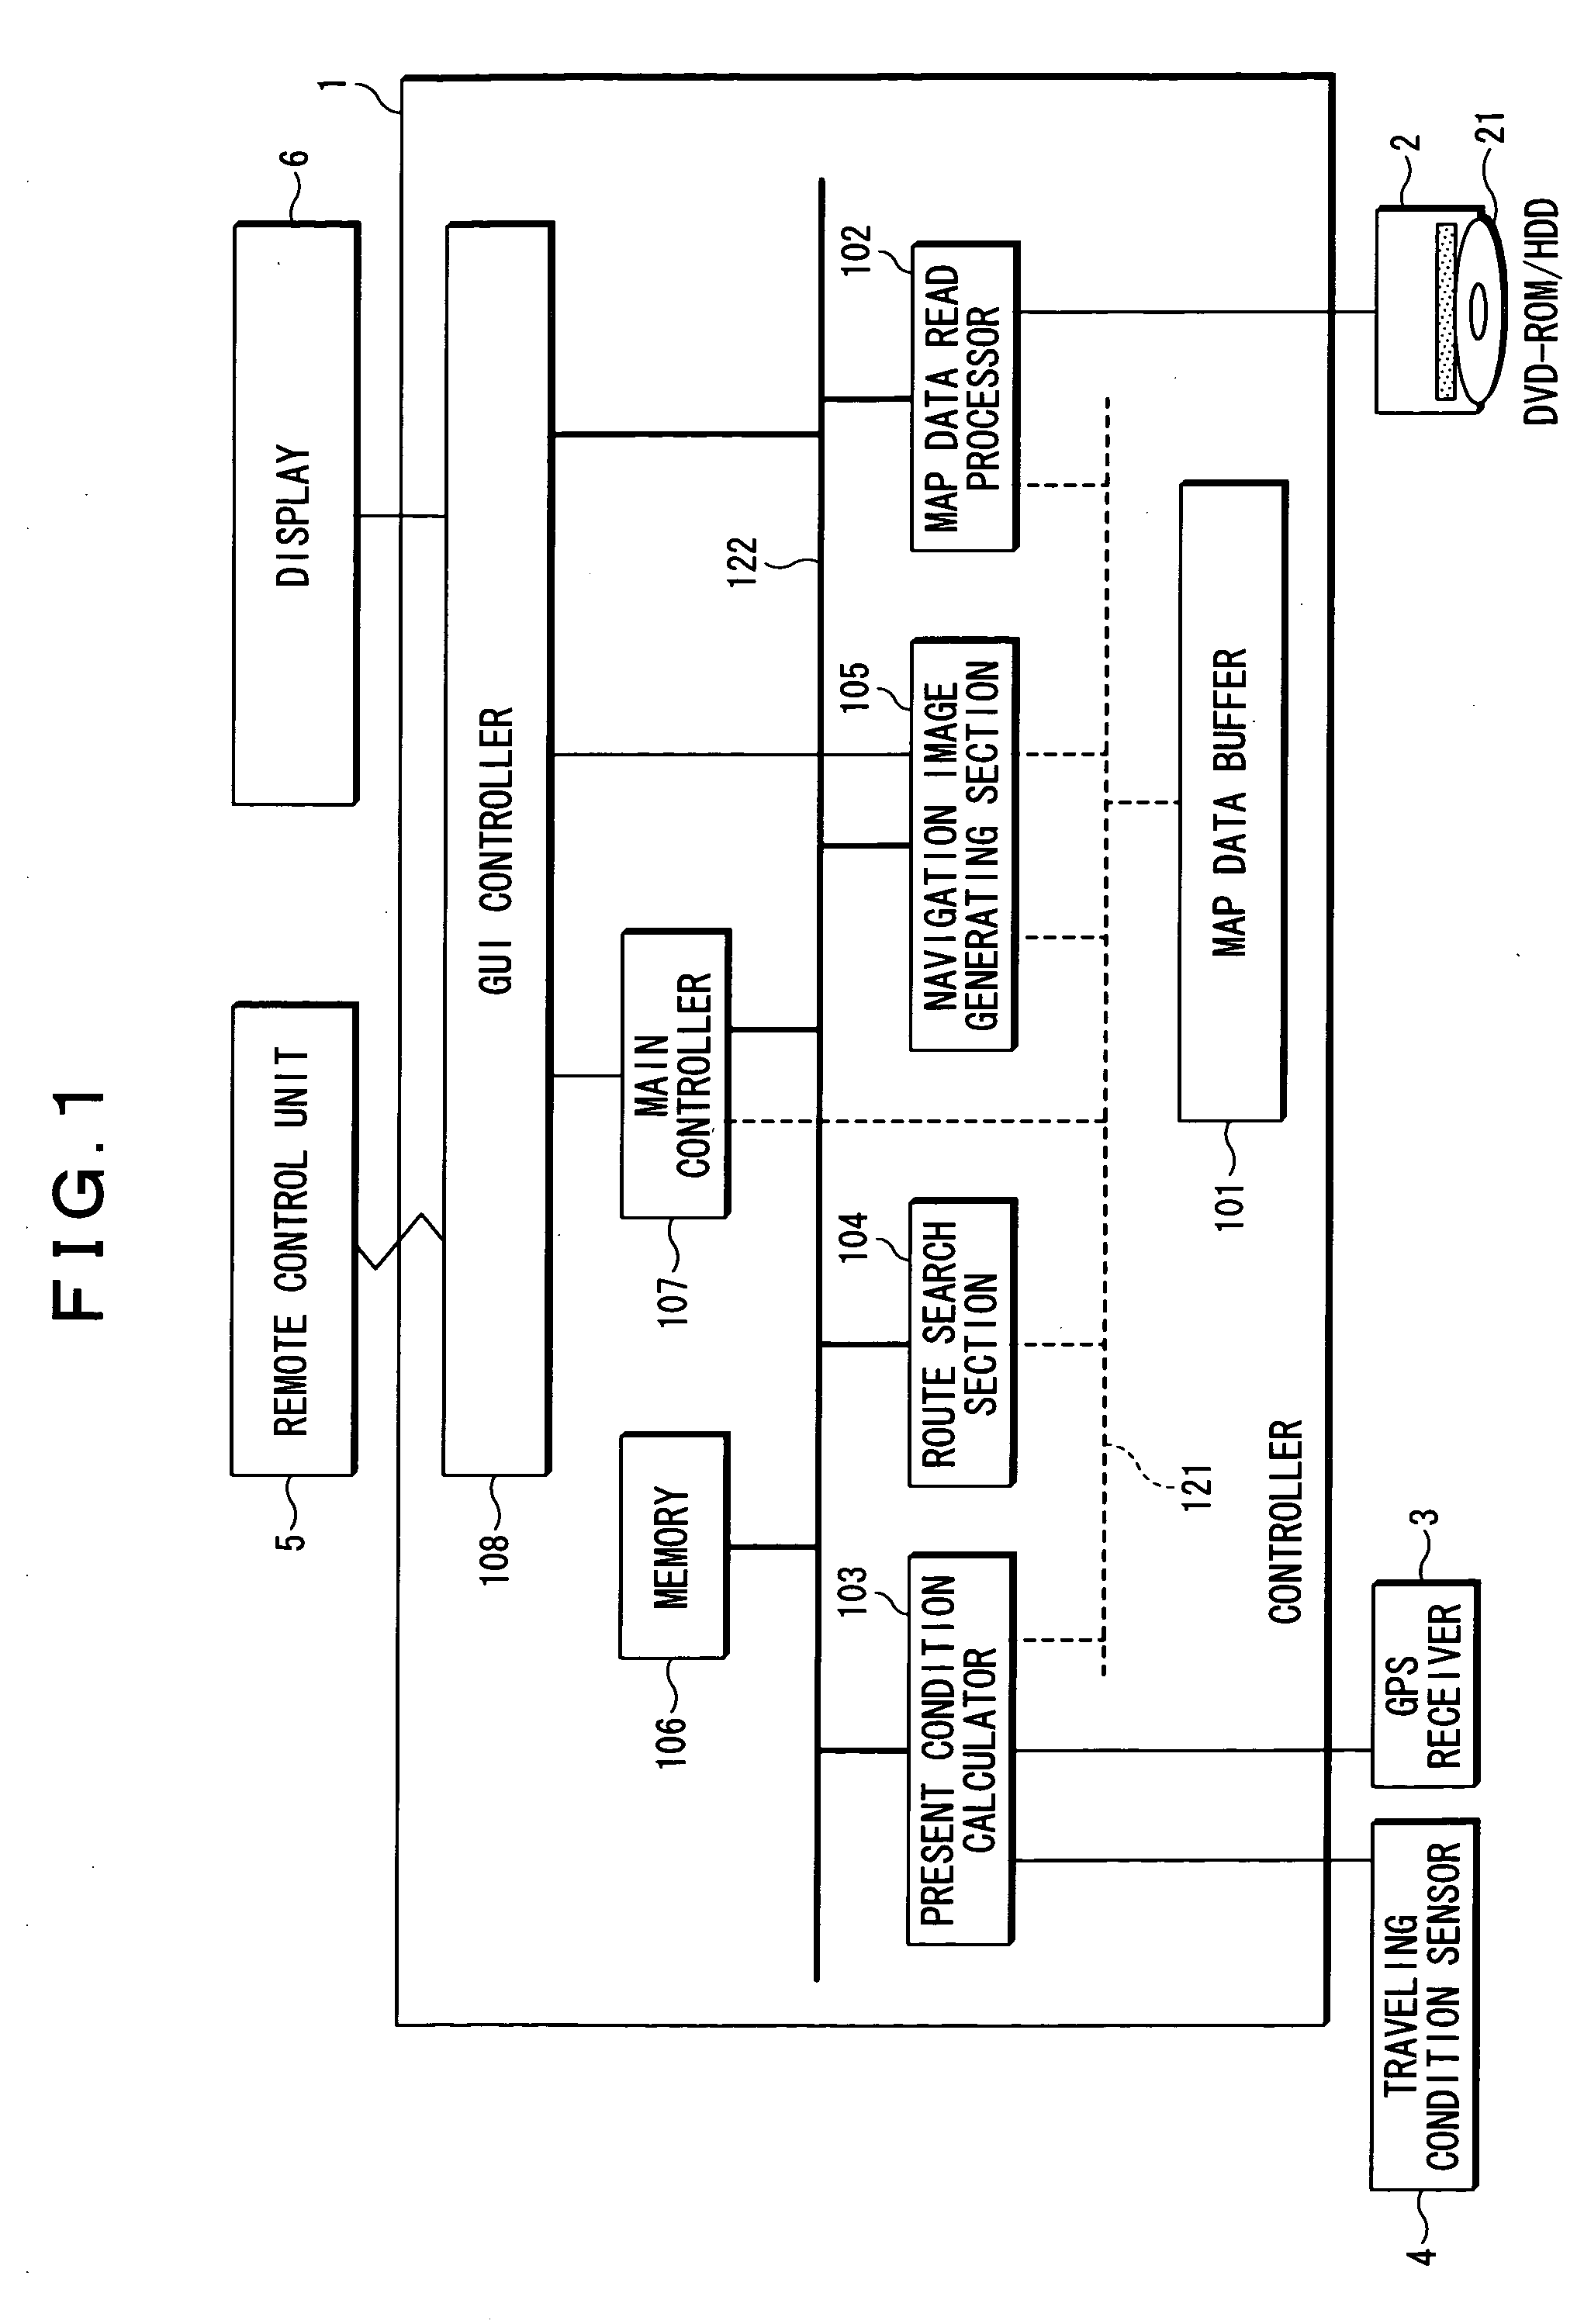 Method and apparatus for displaying a map